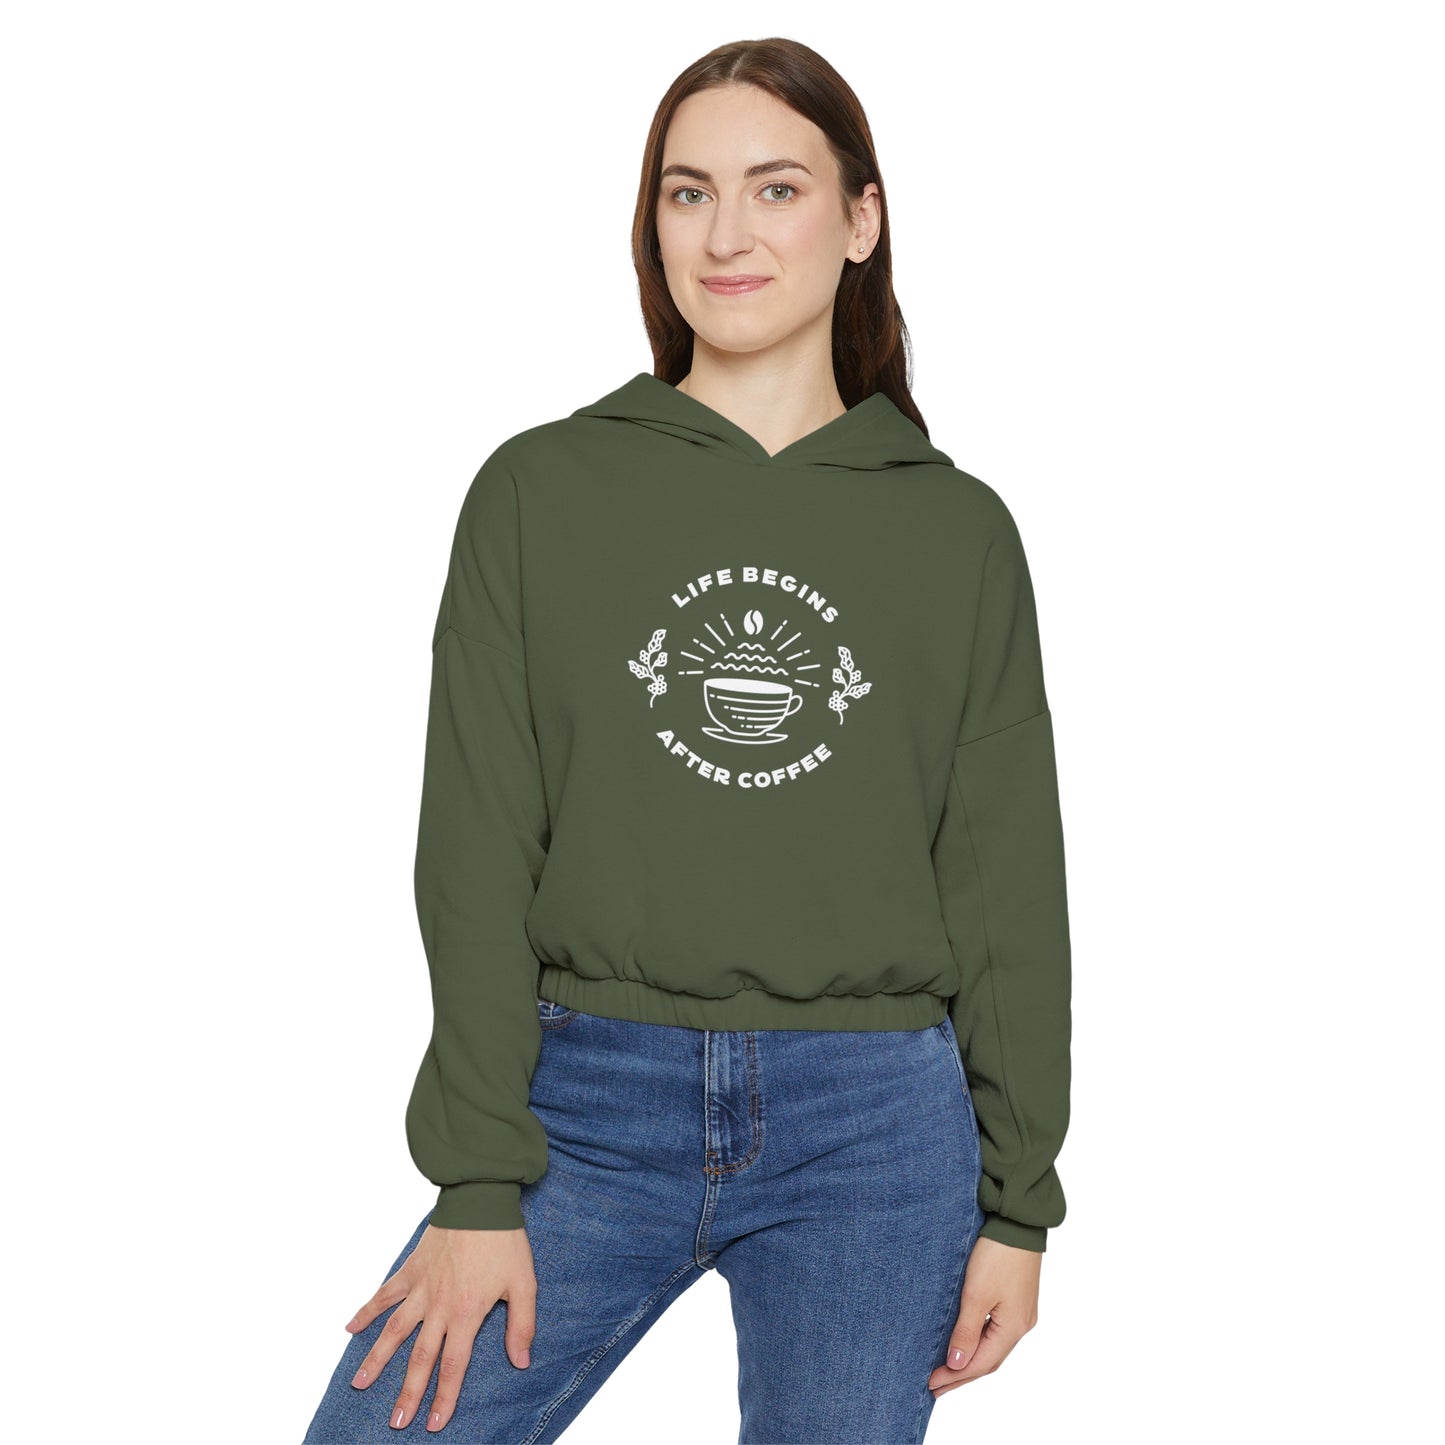 Life Begins After Coffee. Women's Cinched Bottom Hoodie